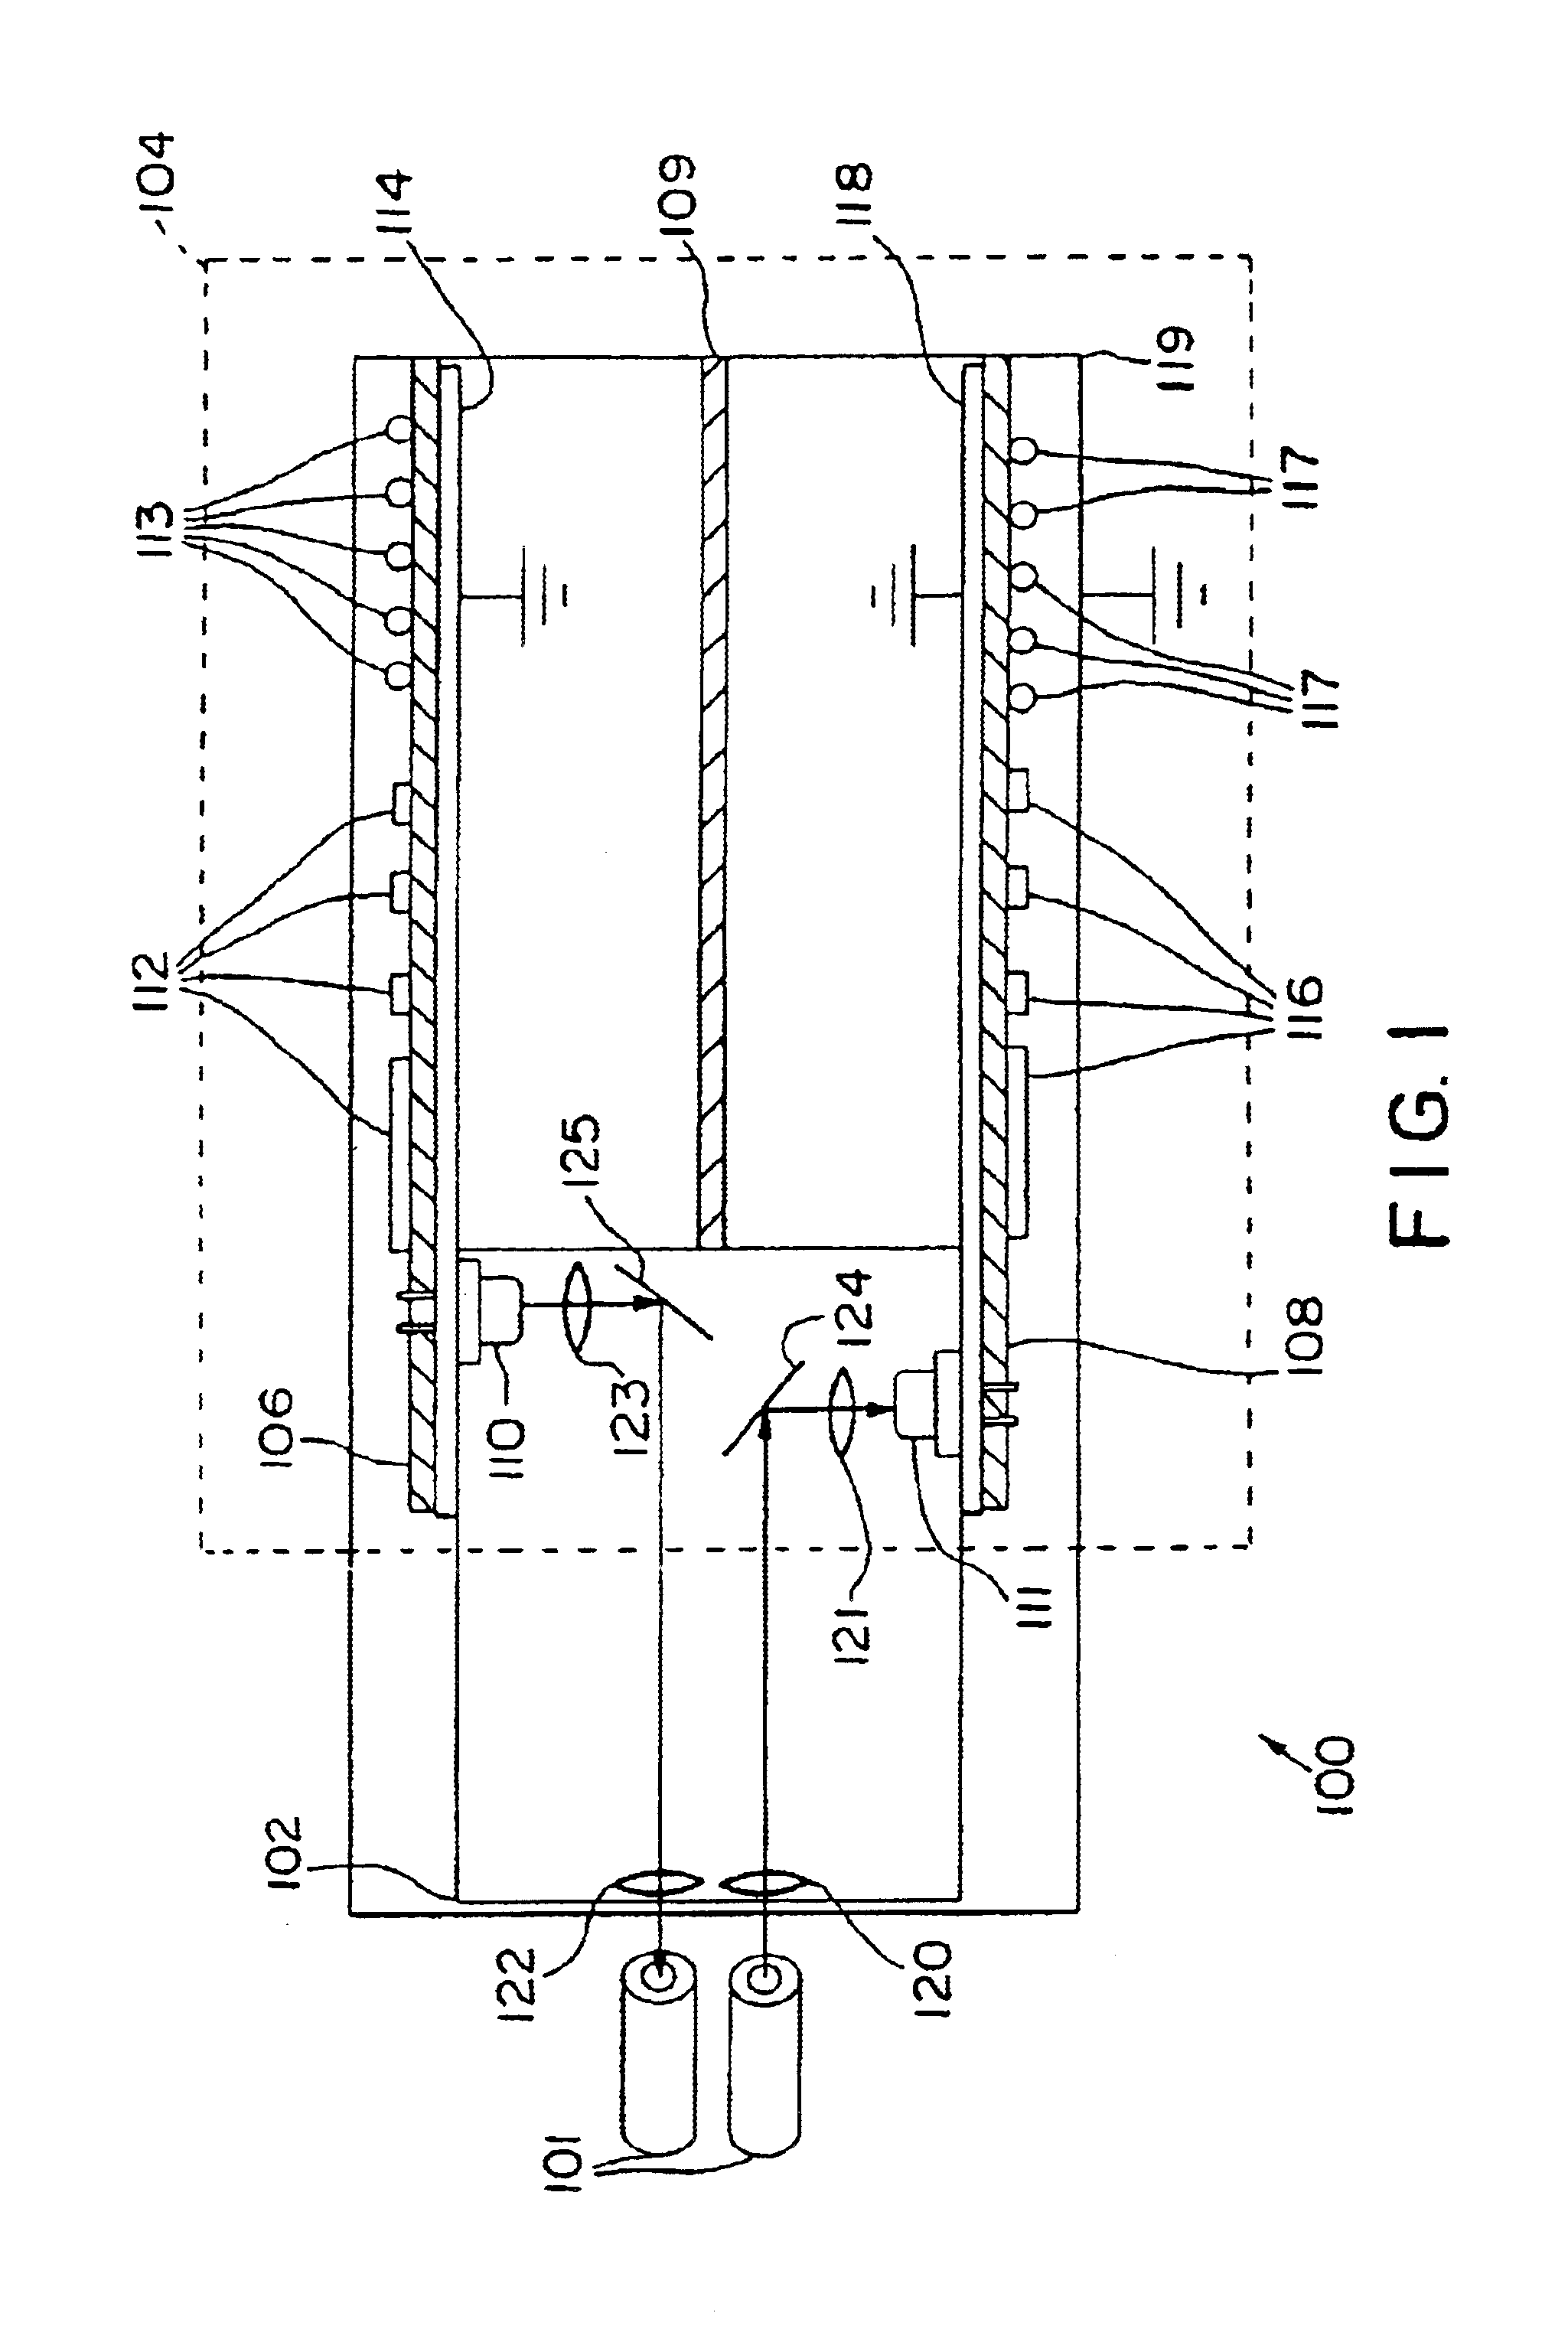 Method and apparatus for vertical board construction of fiber optic transmitters, receivers and transceivers